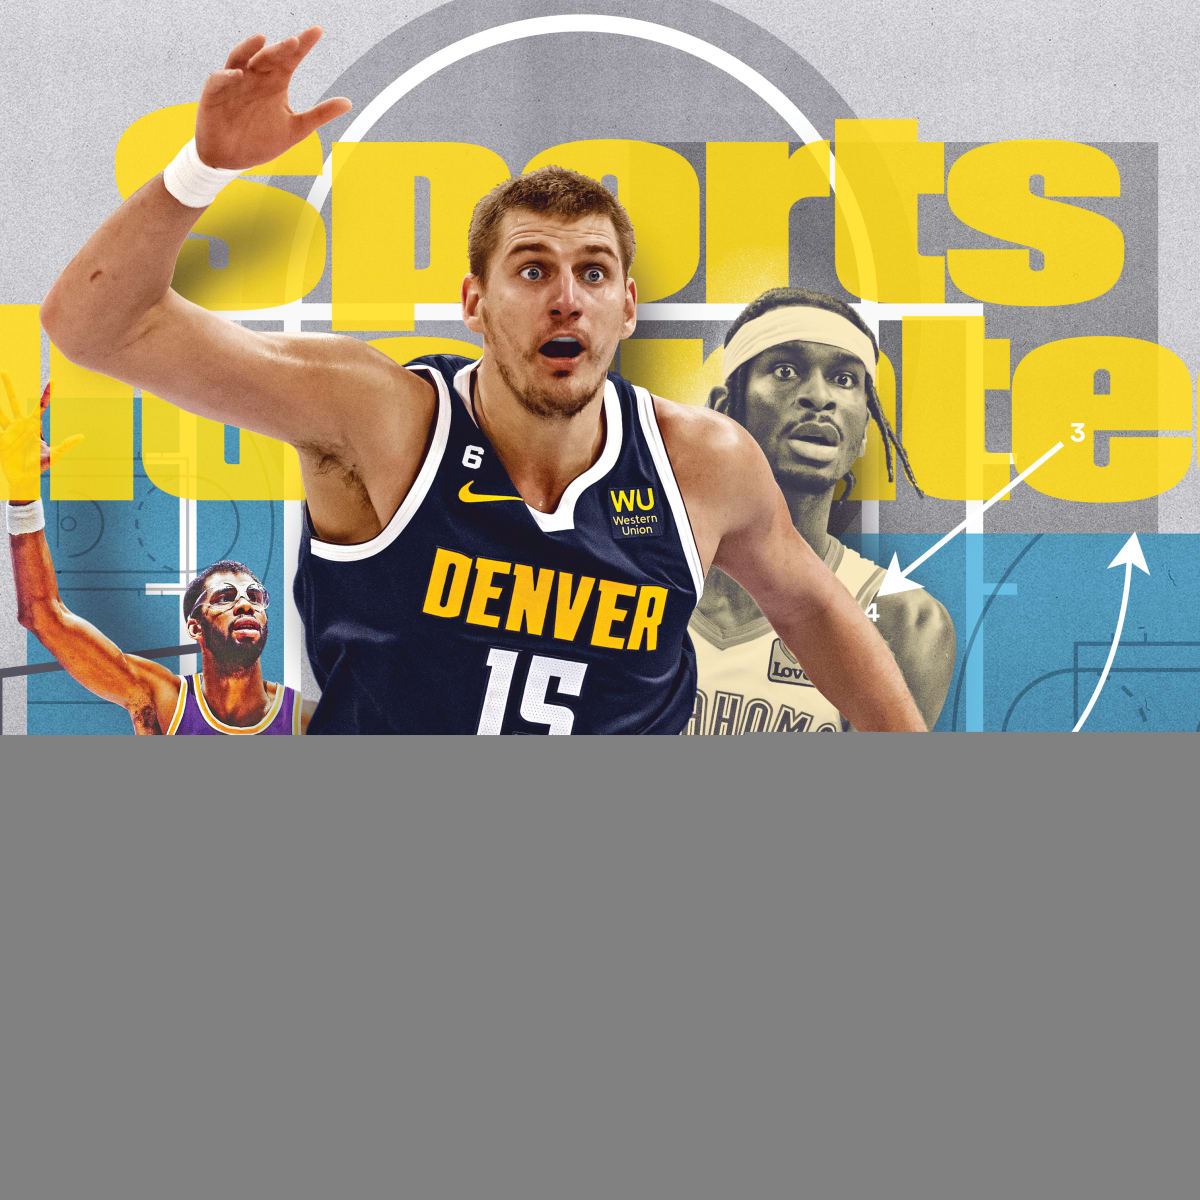 NBA news, scores, stats, standings and analysis - Sports Illustrated